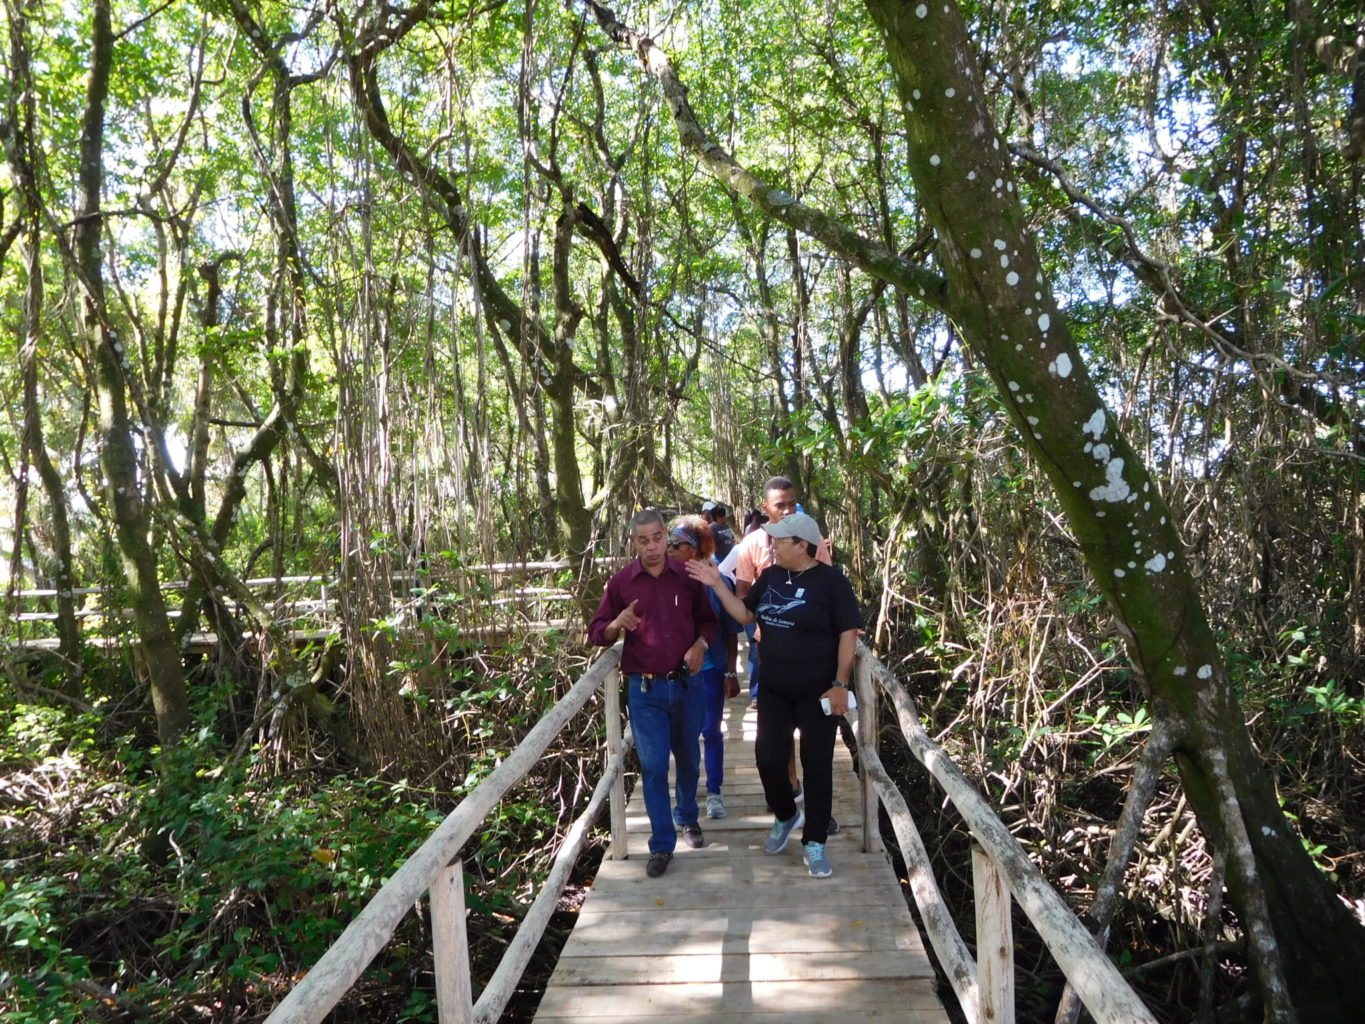 Seacology Prize recipient Patricia Lamelas and others walk on the mangrove boardwalk at Las Garitas, Dominican Republic